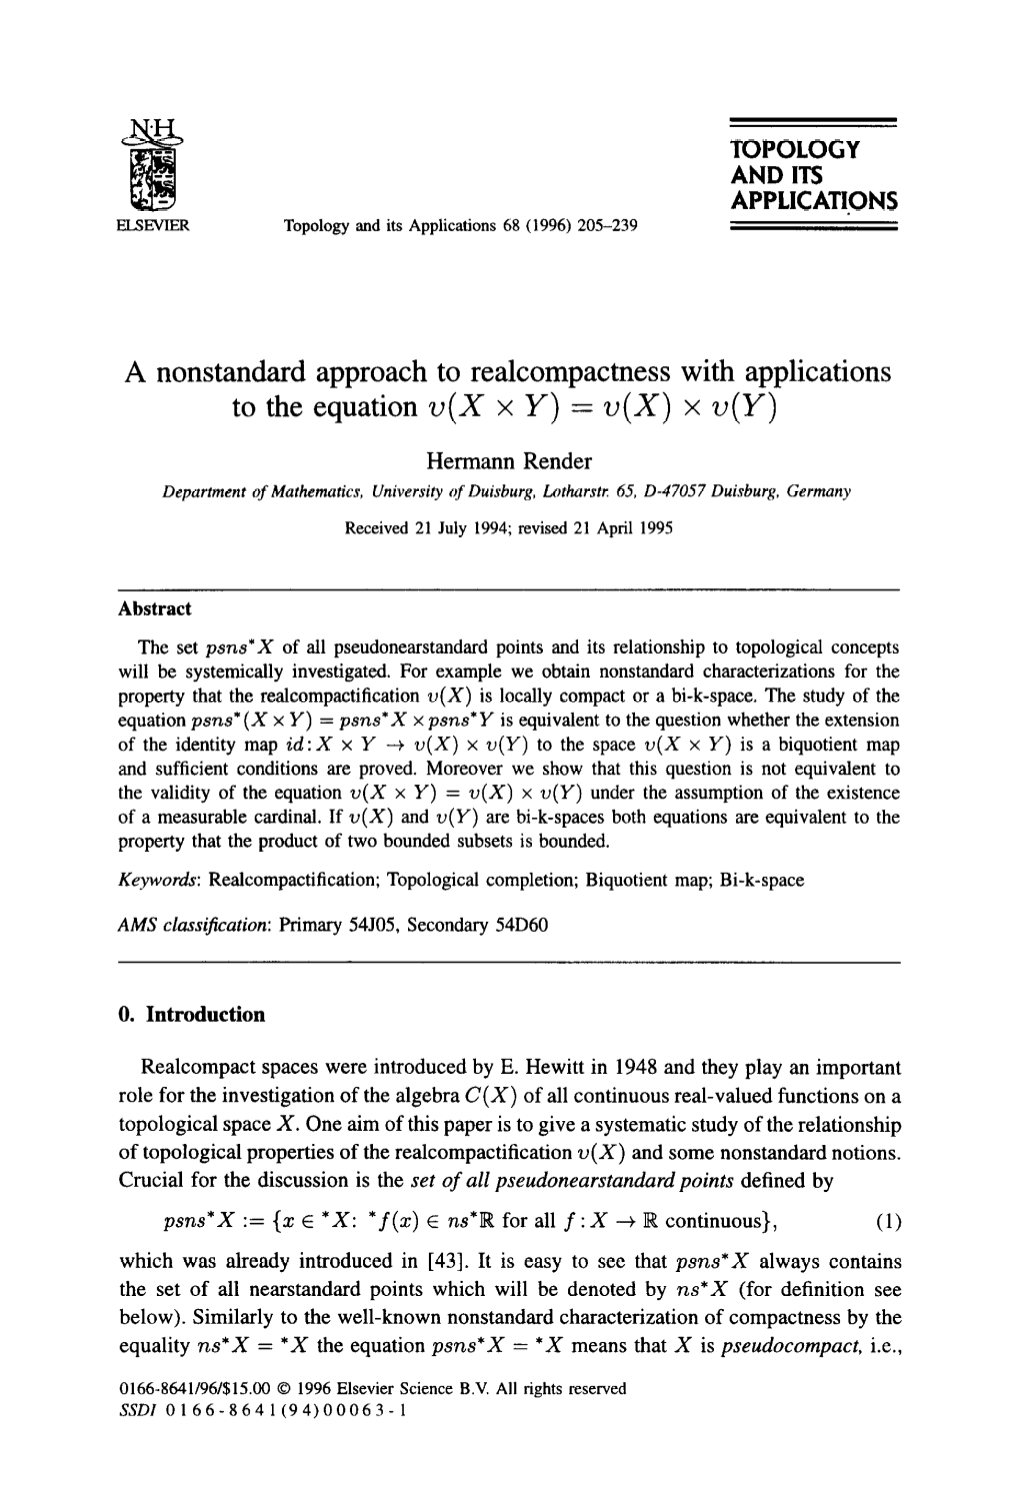 A Nonstandard Approach to Realcompactness with Applications to the Equation W(X X Y) = V(X) X V(Y)